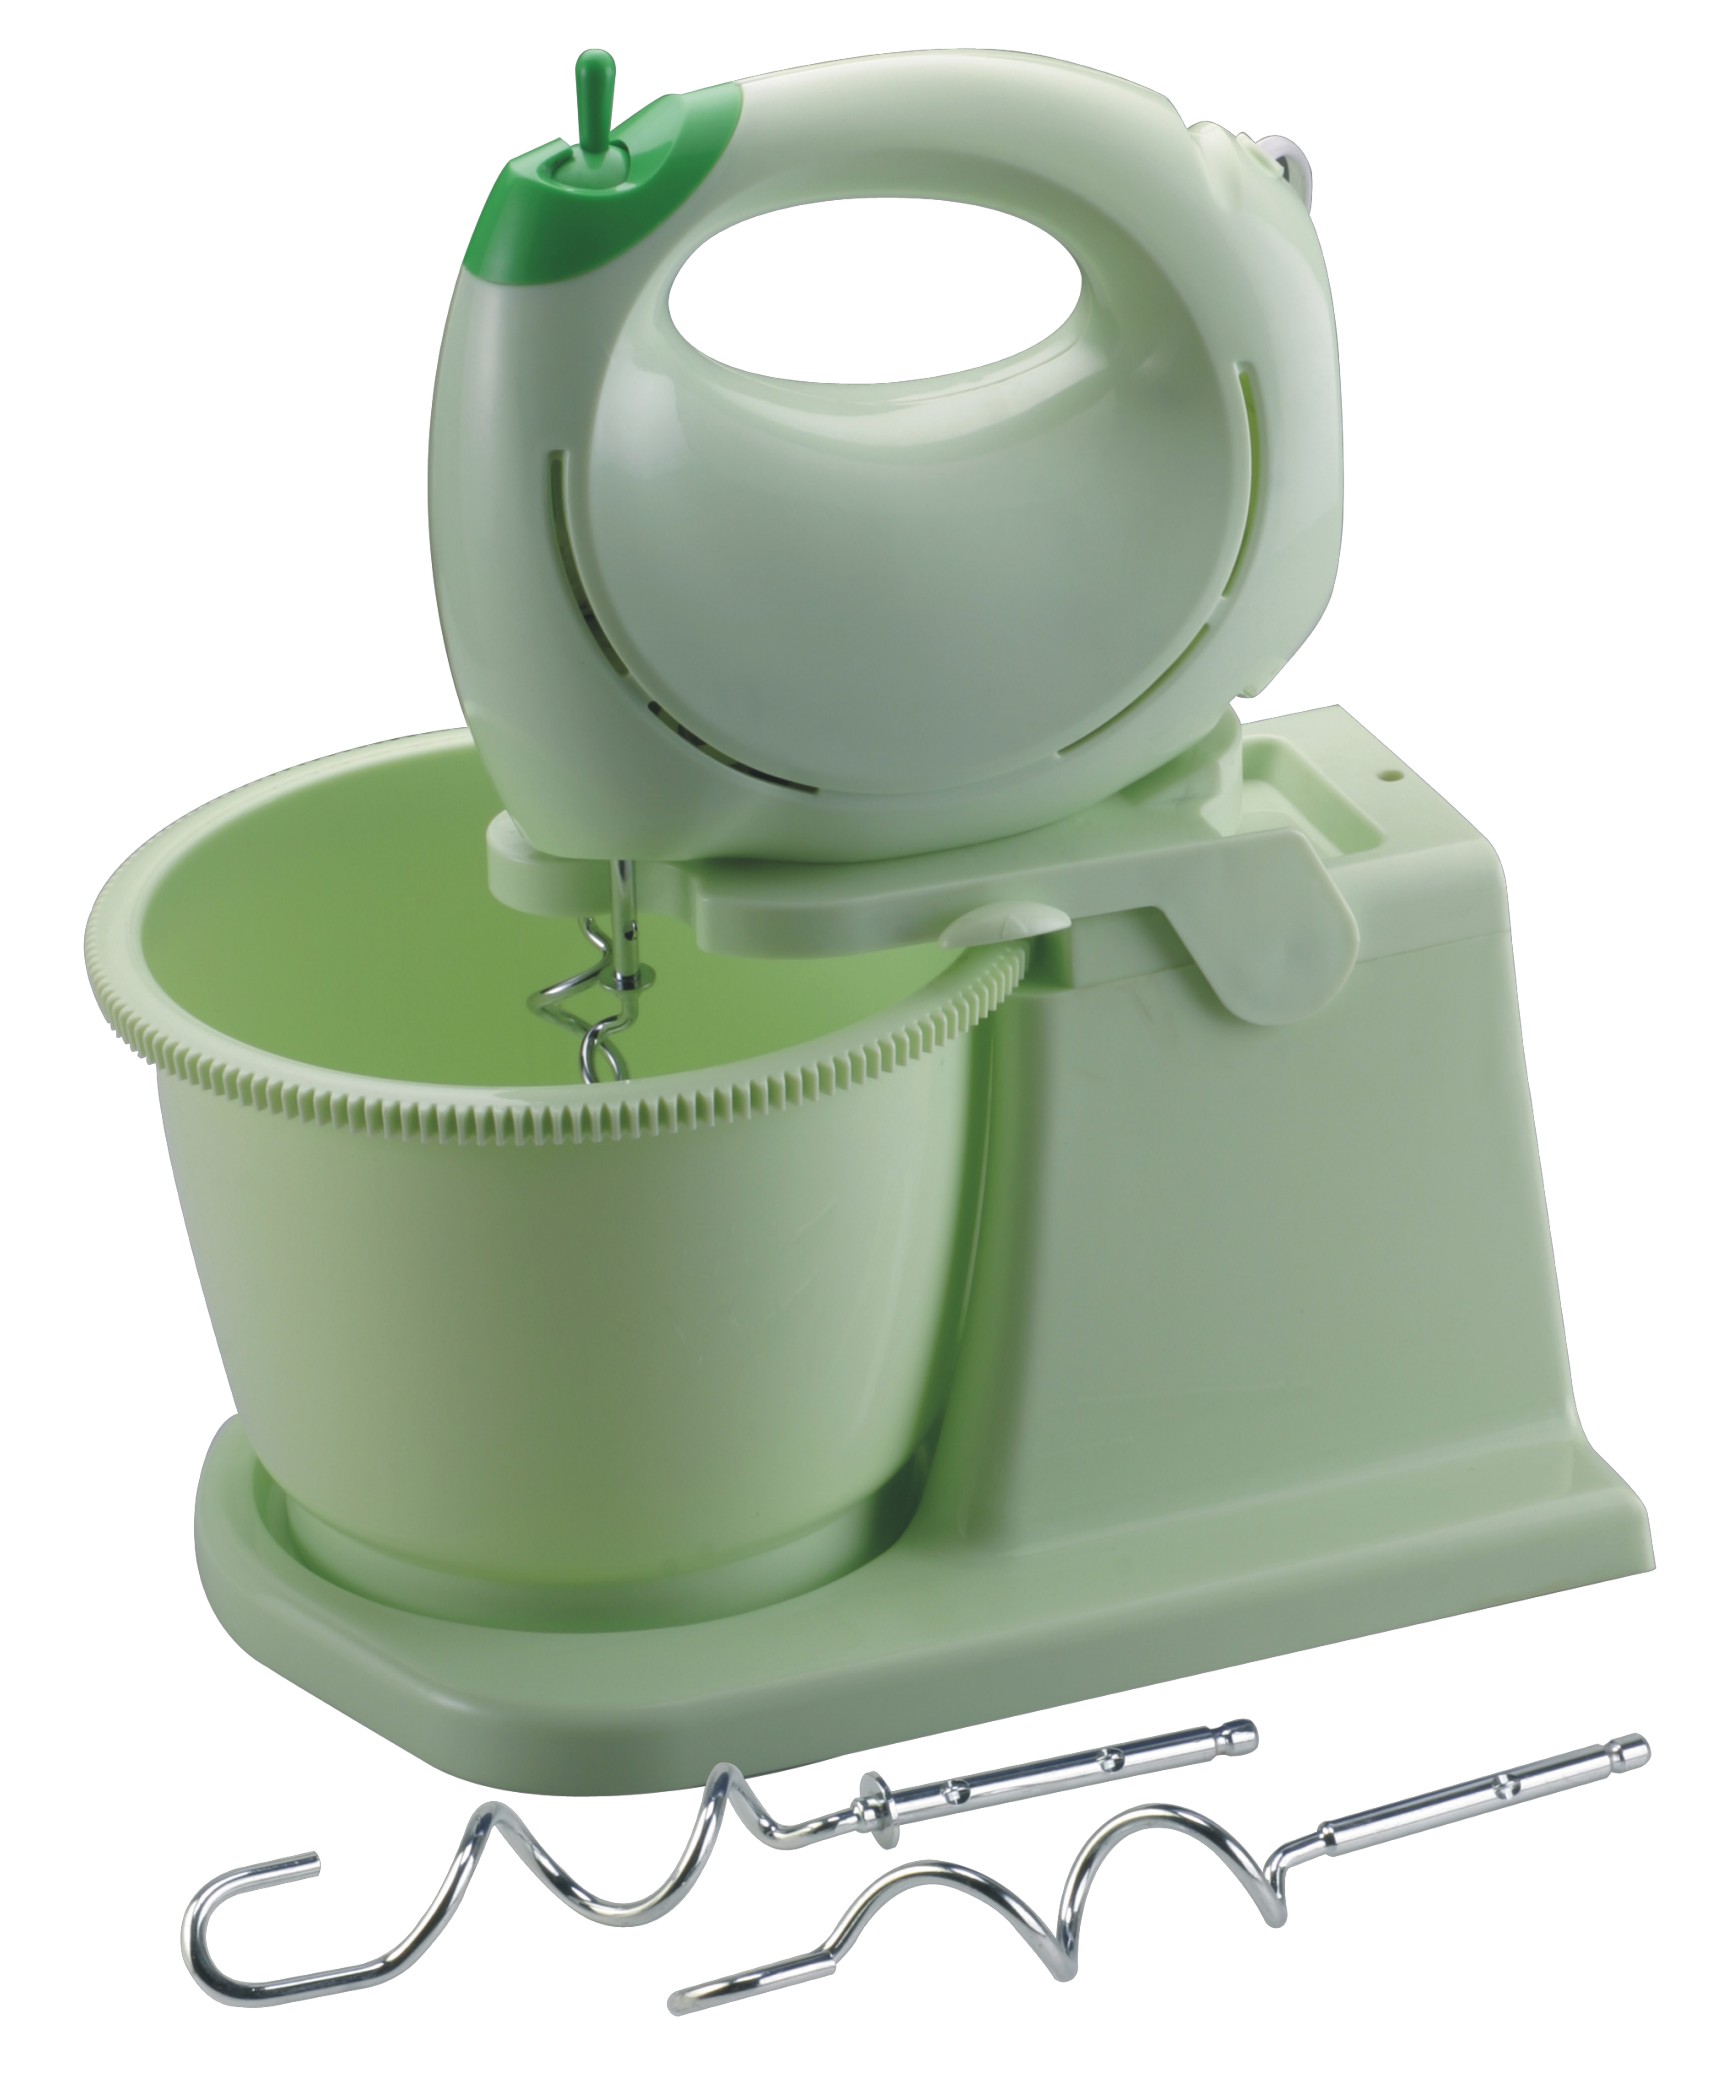 electric egg mixer,egg beater, hand mixer,food mixer with 2.0L PLASTIC  BOWL,5 SPEED